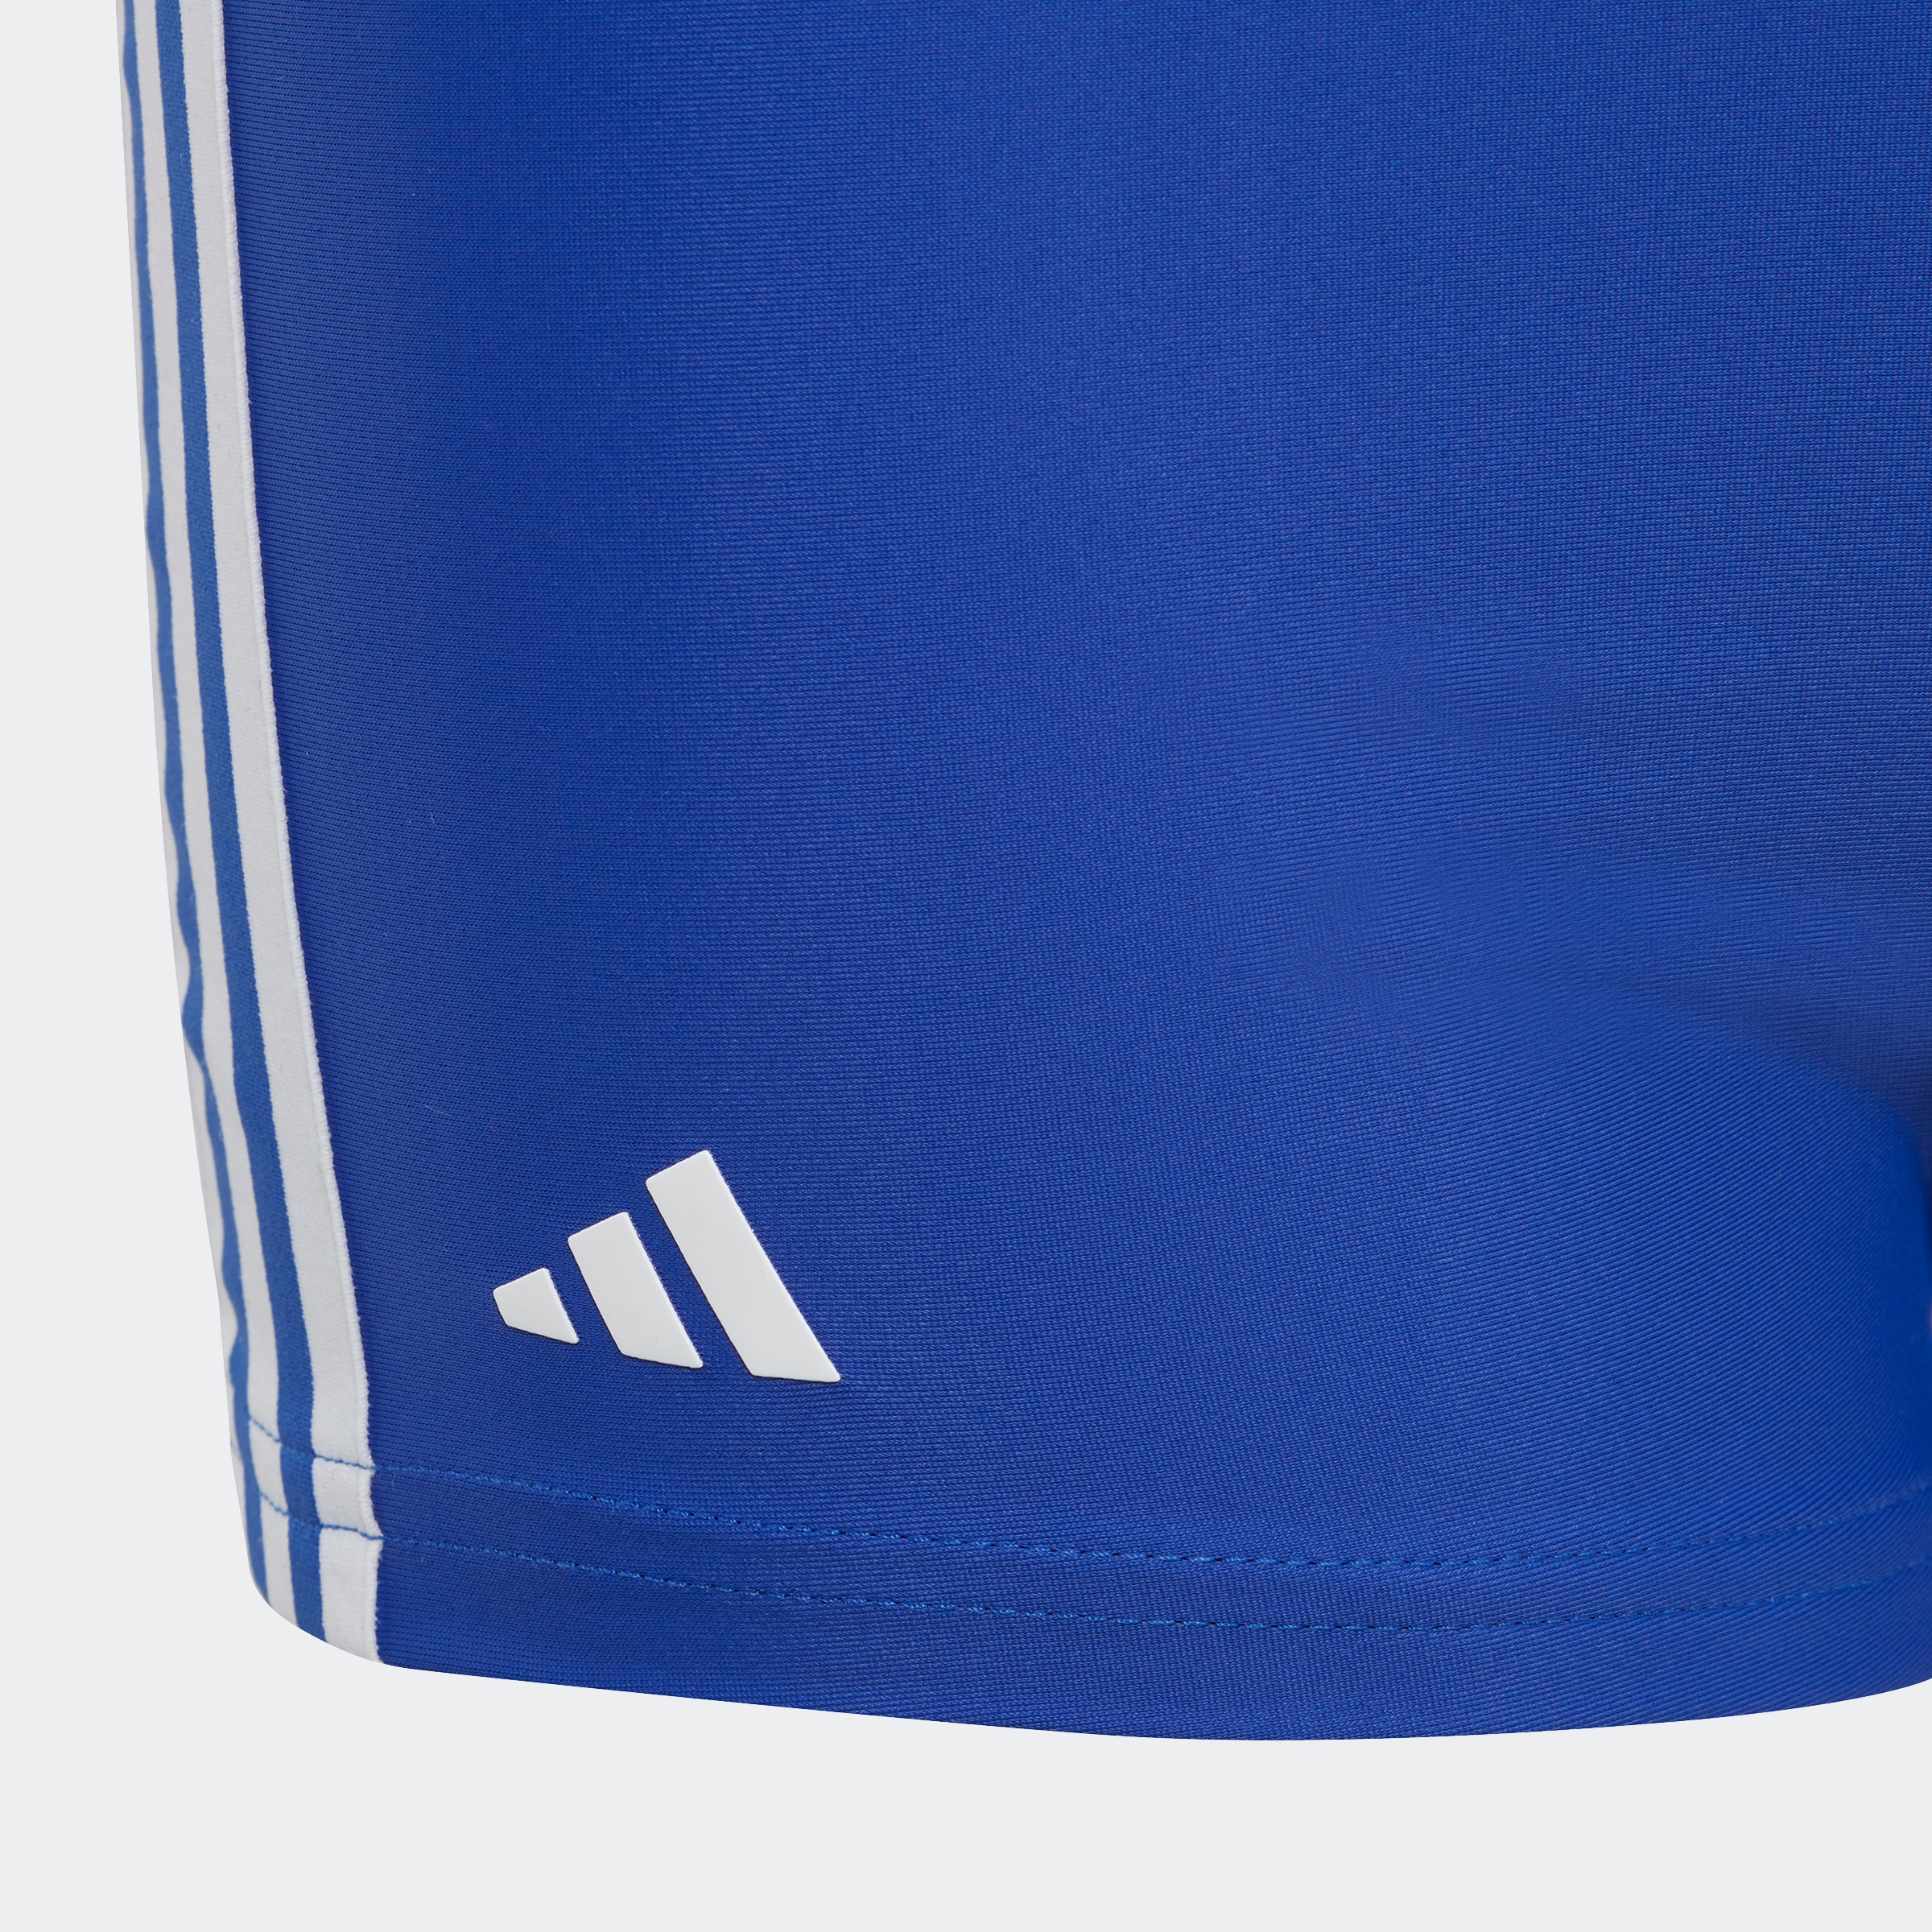 adidas Performance Badehose St.) »3S (1 bei BOXER«